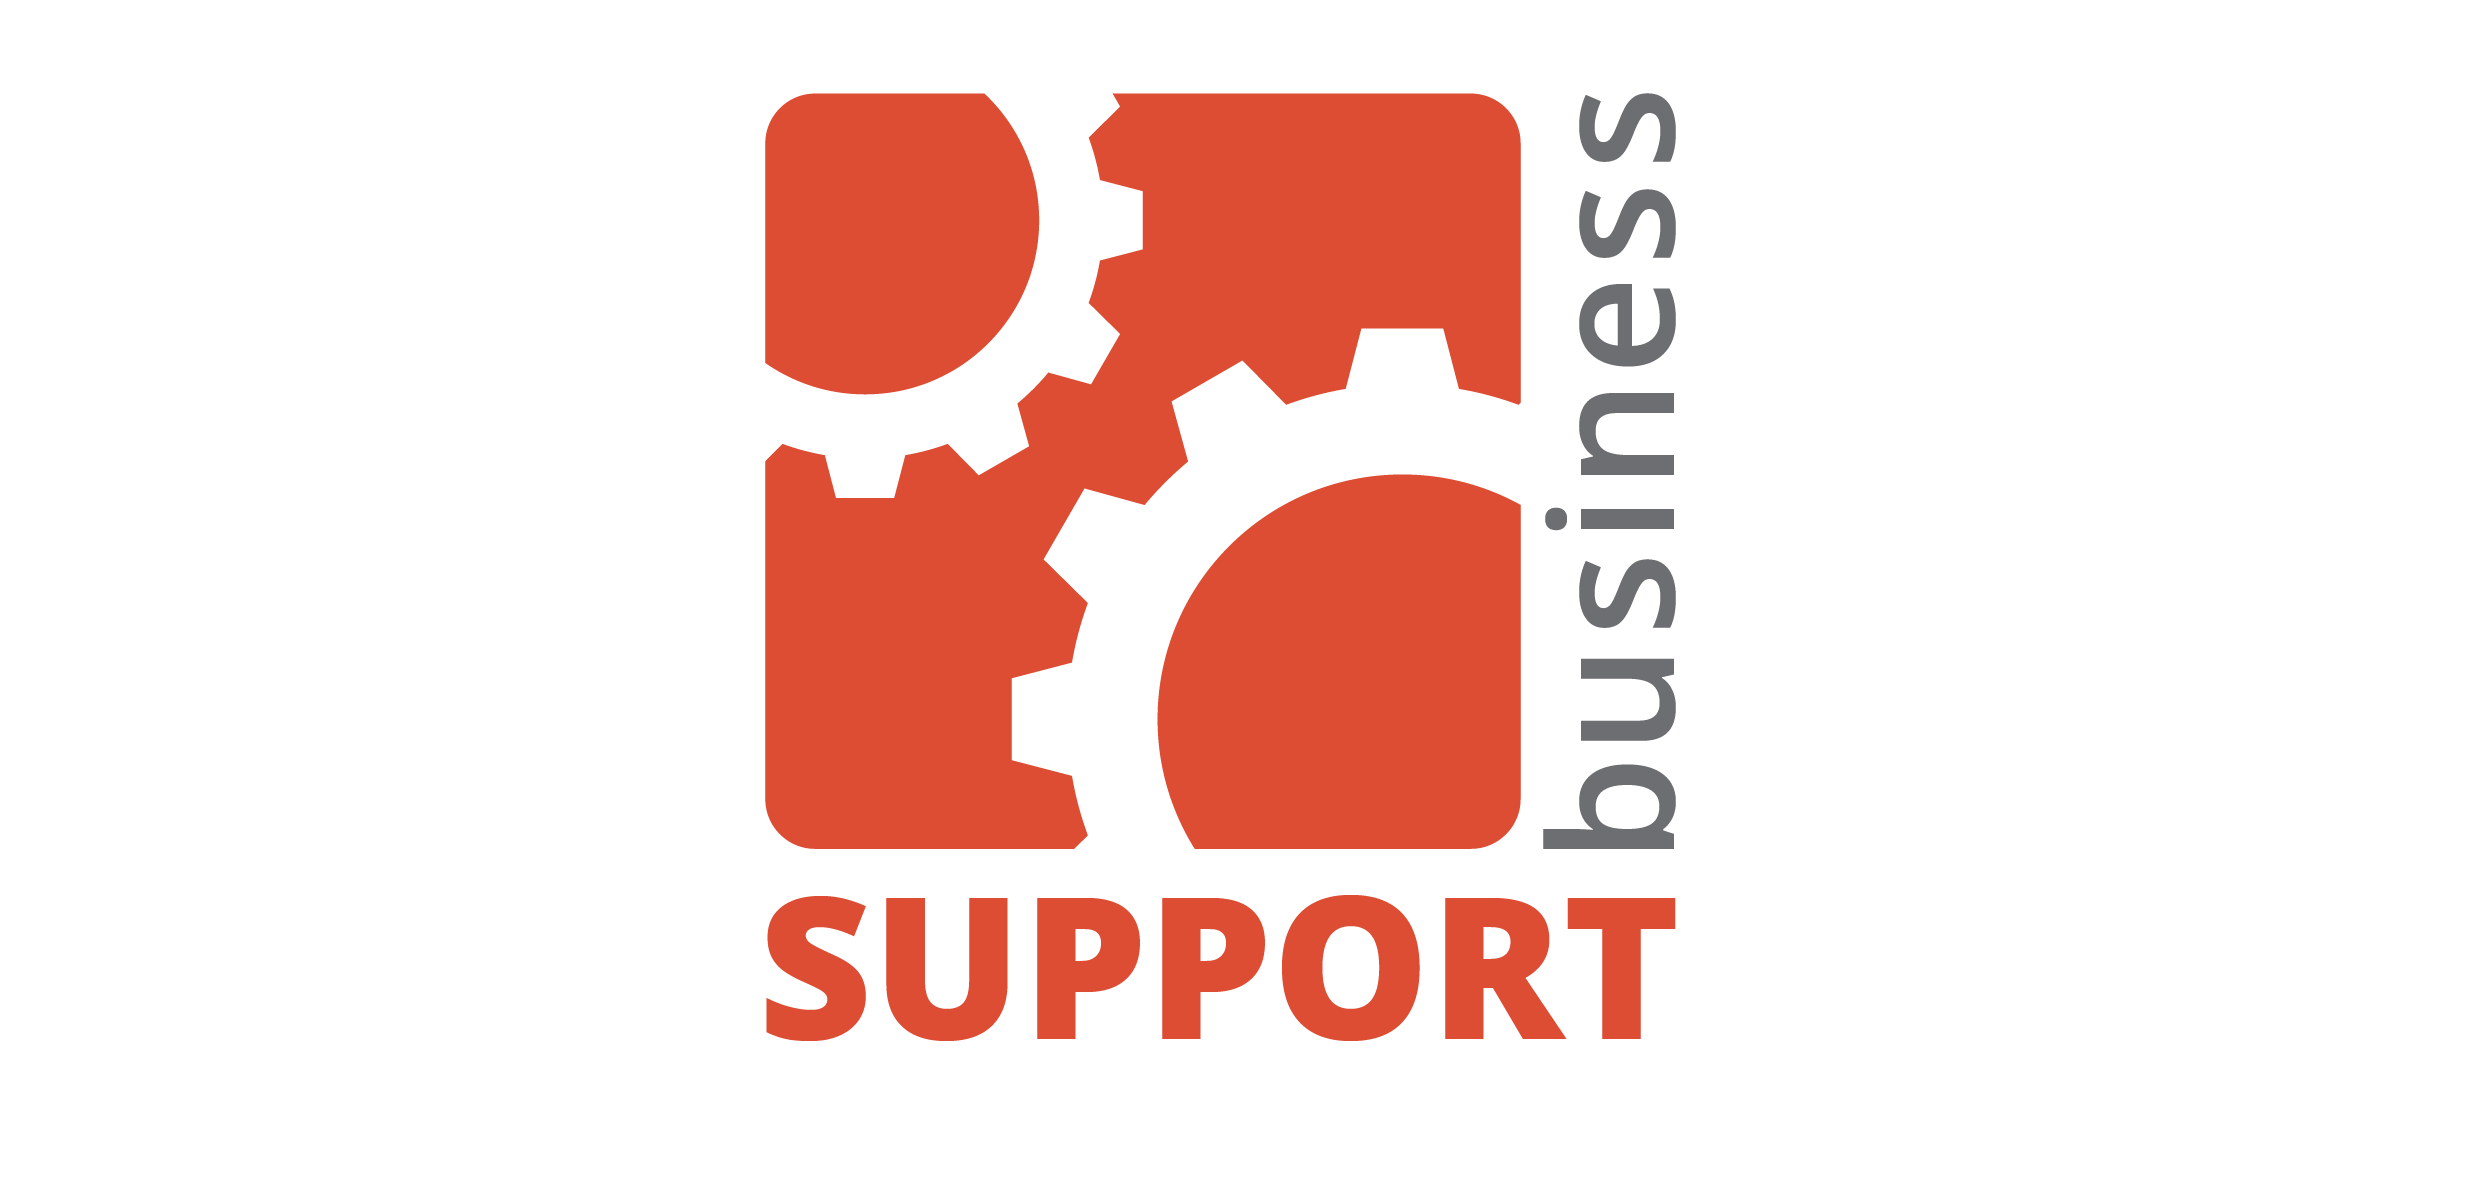 Support Business logo png